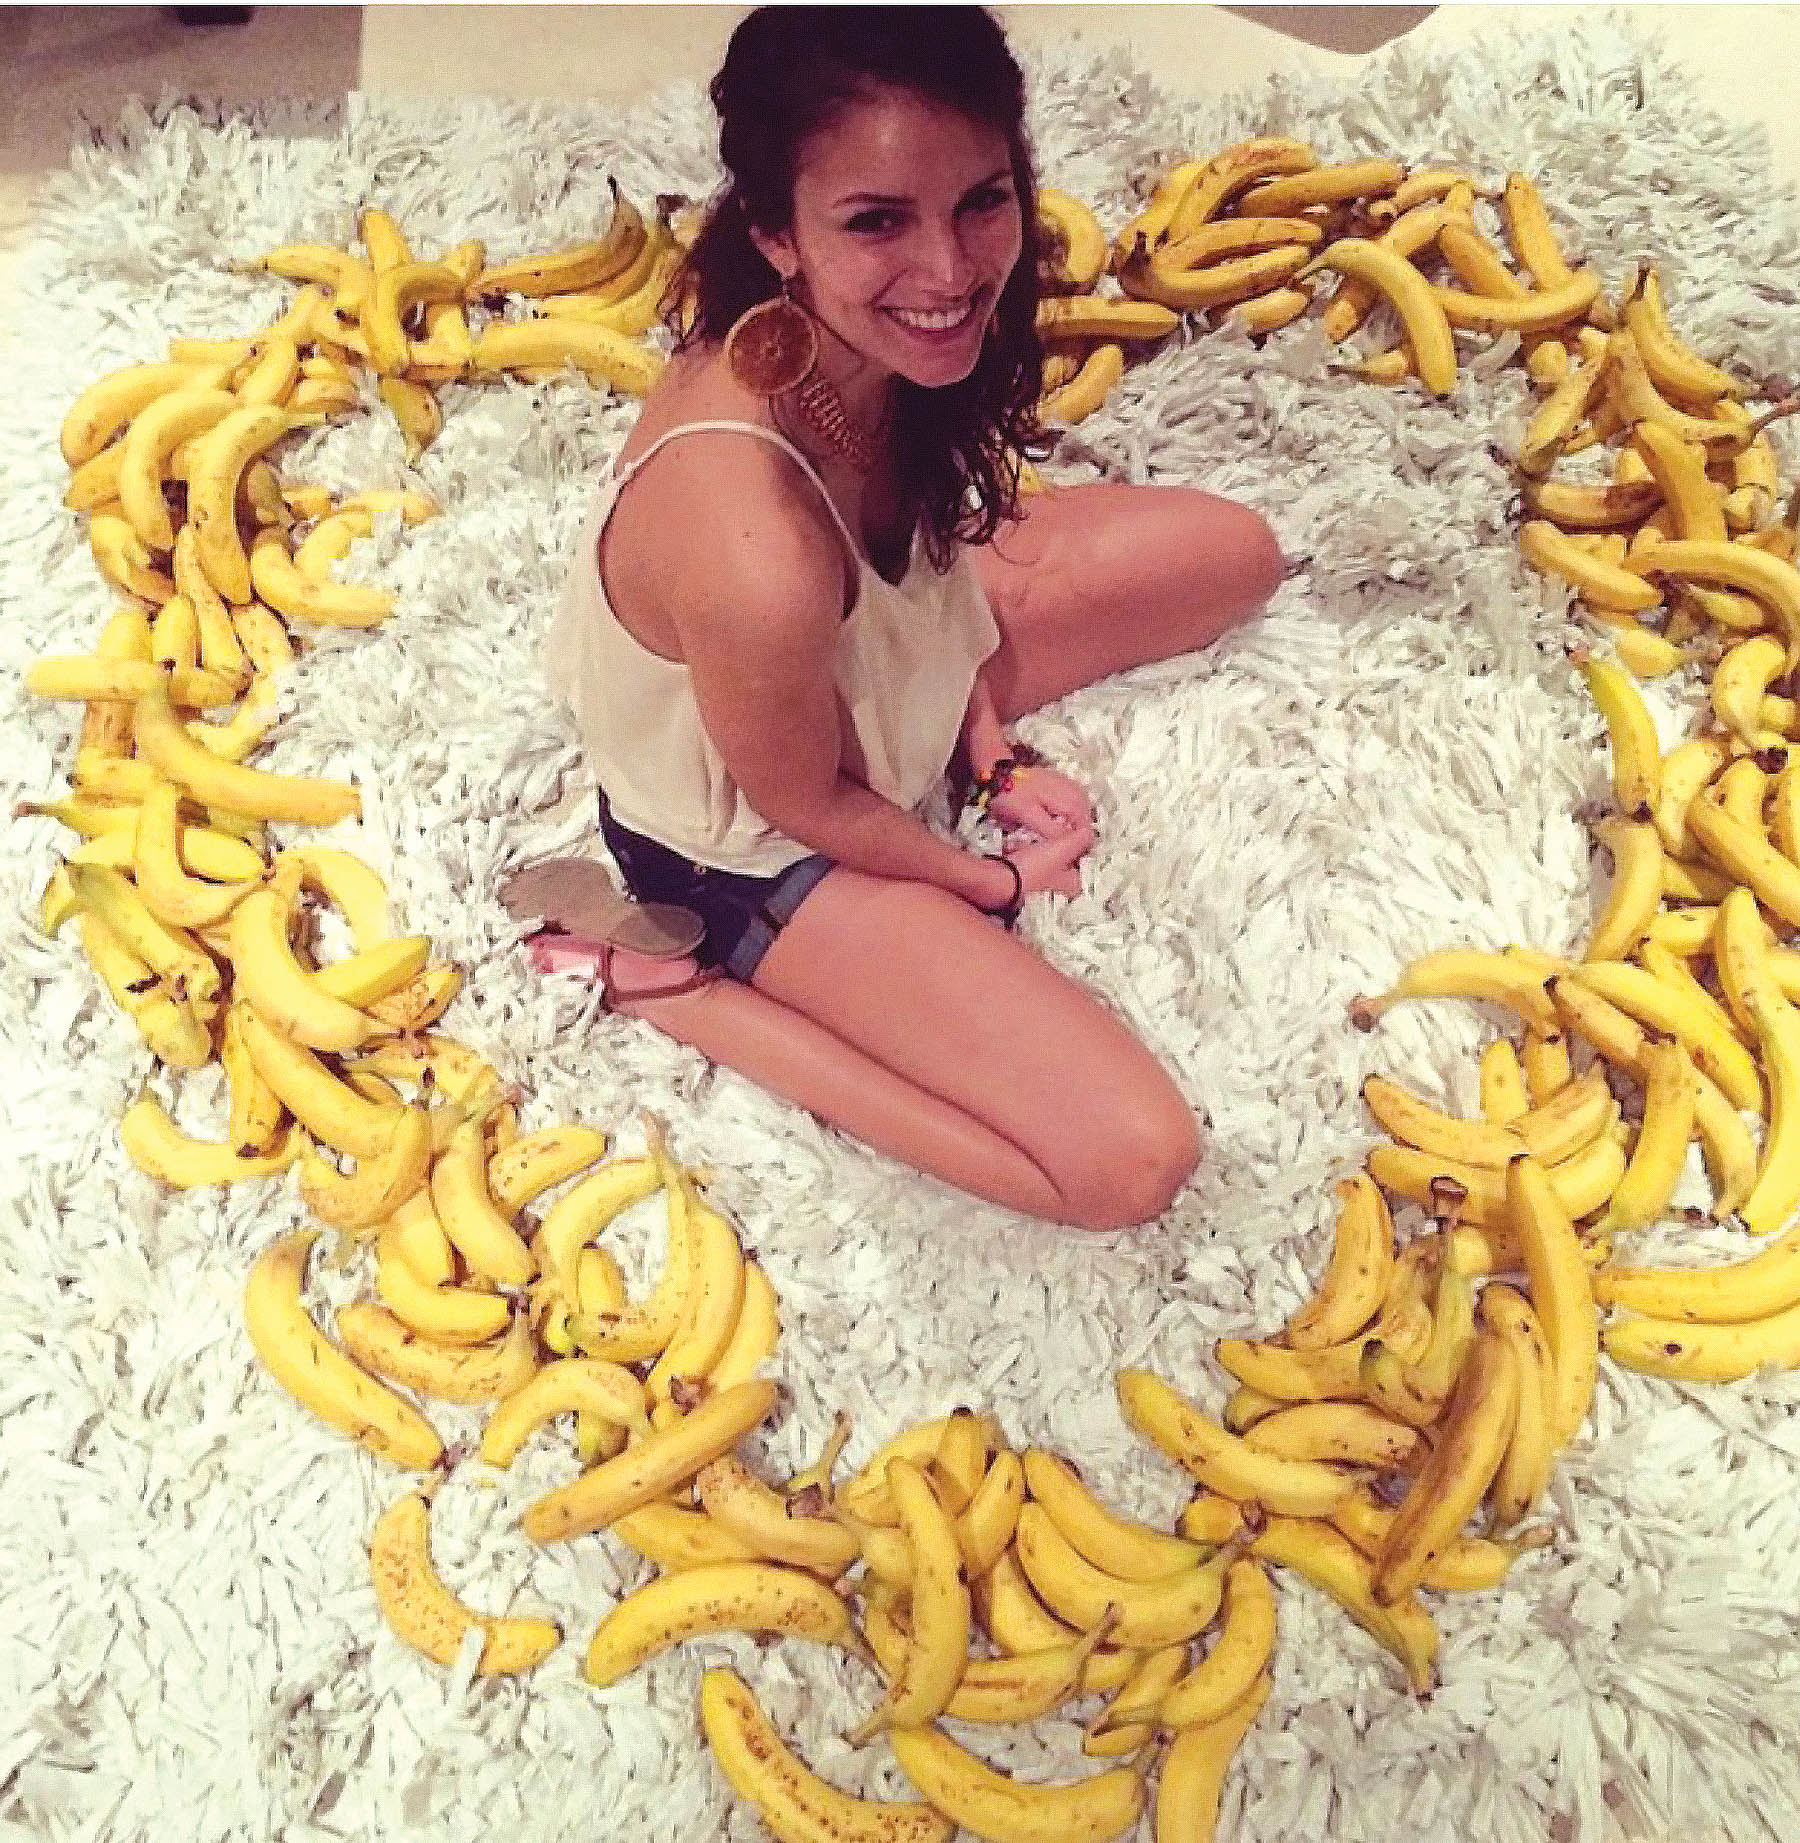 Krista with bananas.